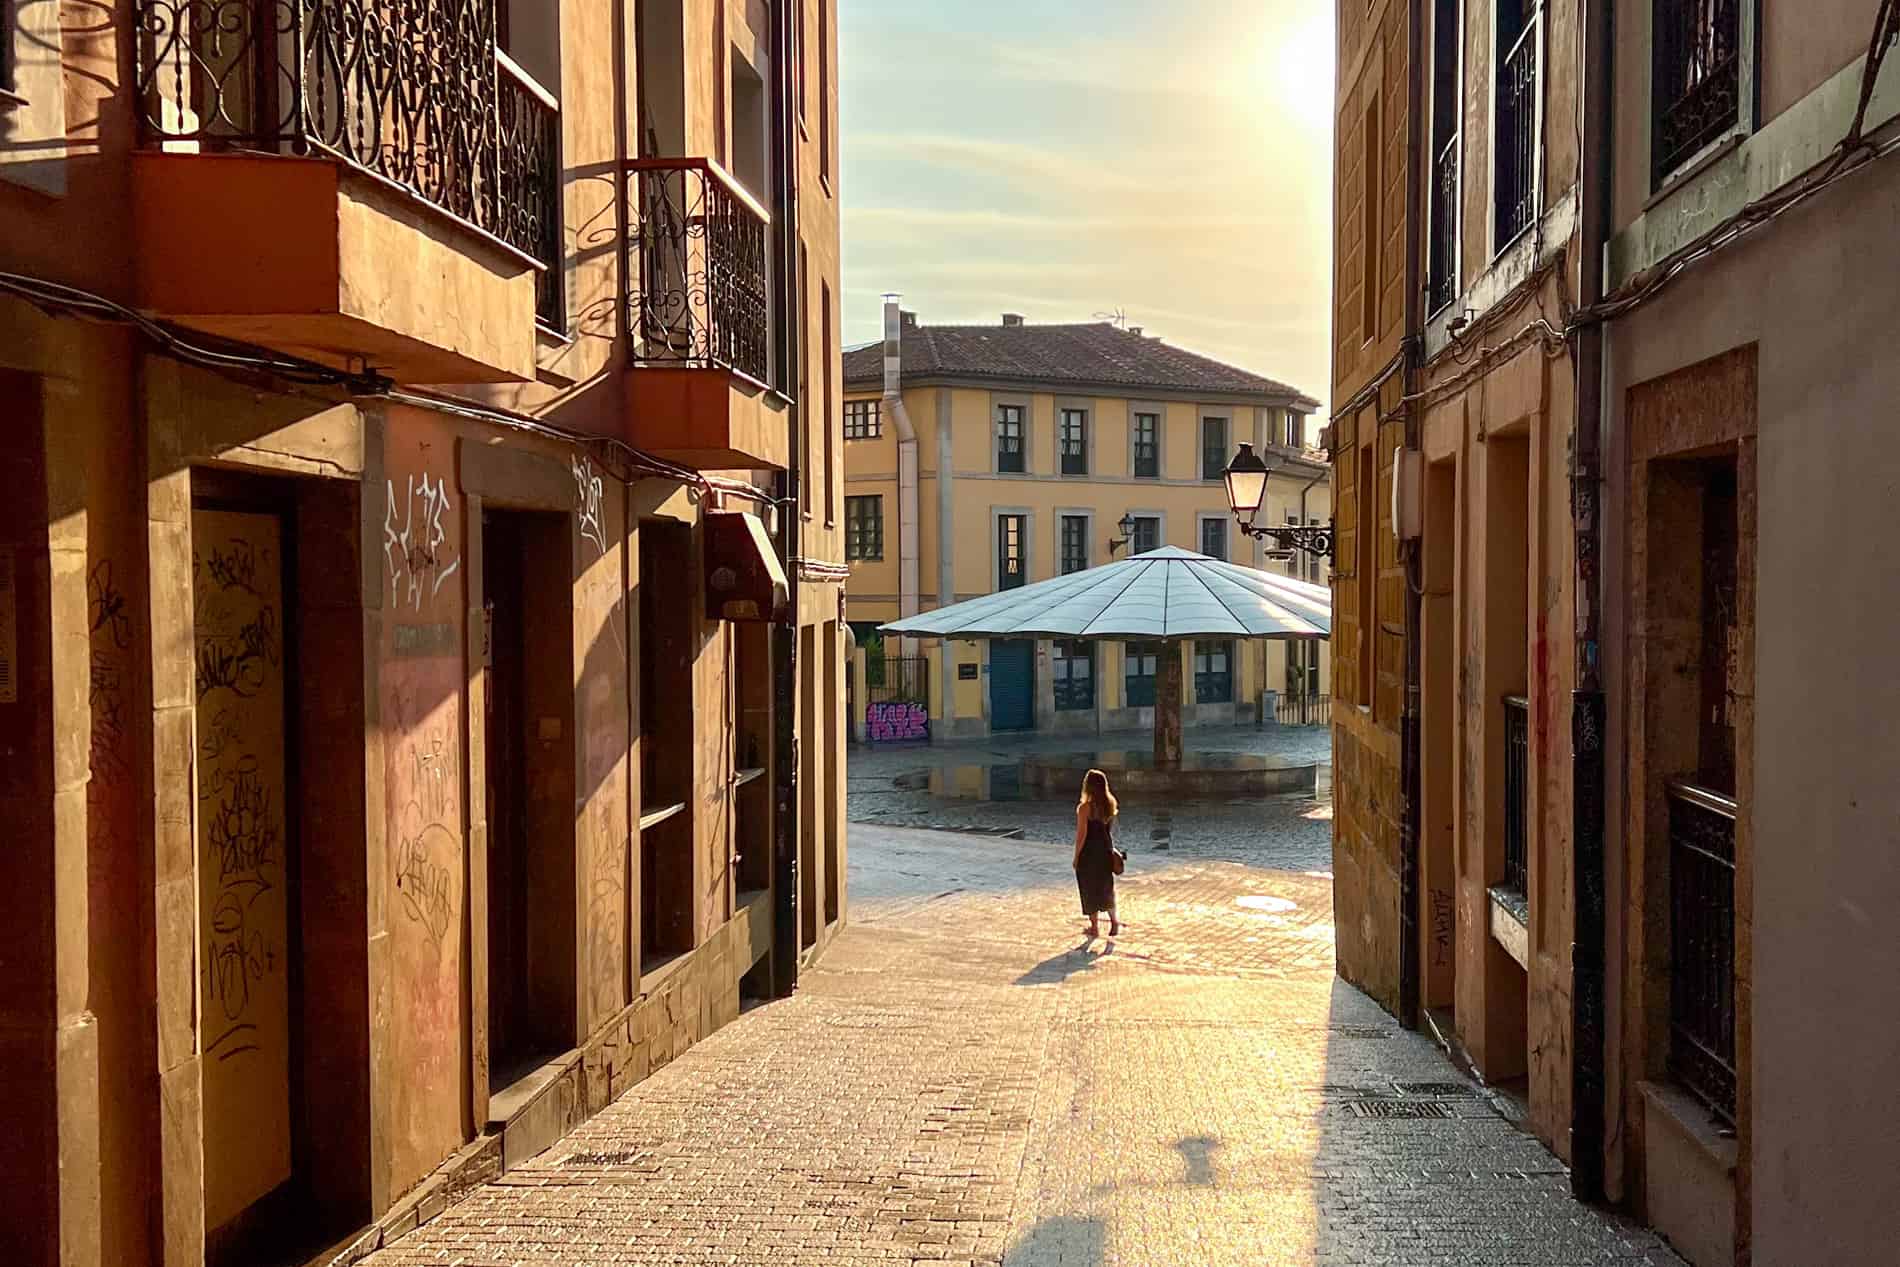 A woman walks down a street in Oviedo during morning golden hour, towards a giant umbrella structure in a public square.